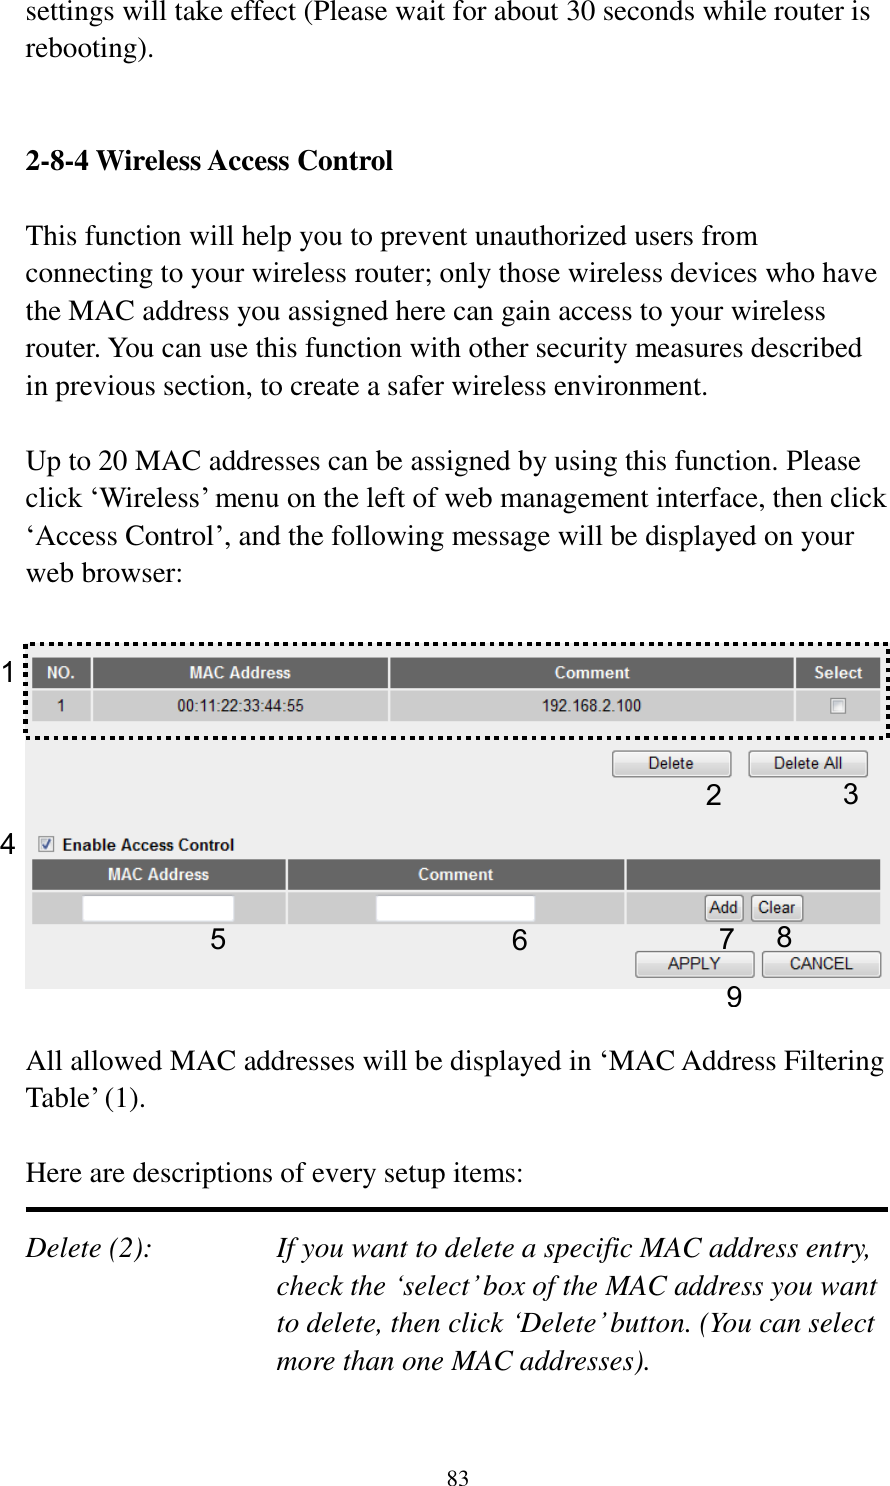 83 settings will take effect (Please wait for about 30 seconds while router is rebooting).   2-8-4 Wireless Access Control  This function will help you to prevent unauthorized users from connecting to your wireless router; only those wireless devices who have the MAC address you assigned here can gain access to your wireless router. You can use this function with other security measures described in previous section, to create a safer wireless environment.  Up to 20 MAC addresses can be assigned by using this function. Please click „Wireless‟ menu on the left of web management interface, then click „Access Control‟, and the following message will be displayed on your web browser:    All allowed MAC addresses will be displayed in „MAC Address Filtering Table‟ (1).    Here are descriptions of every setup items:  Delete (2):    If you want to delete a specific MAC address entry, check the „select‟ box of the MAC address you want to delete, then click „Delete‟ button. (You can select more than one MAC addresses).  1 2 3 4 6 7 8 9 5 